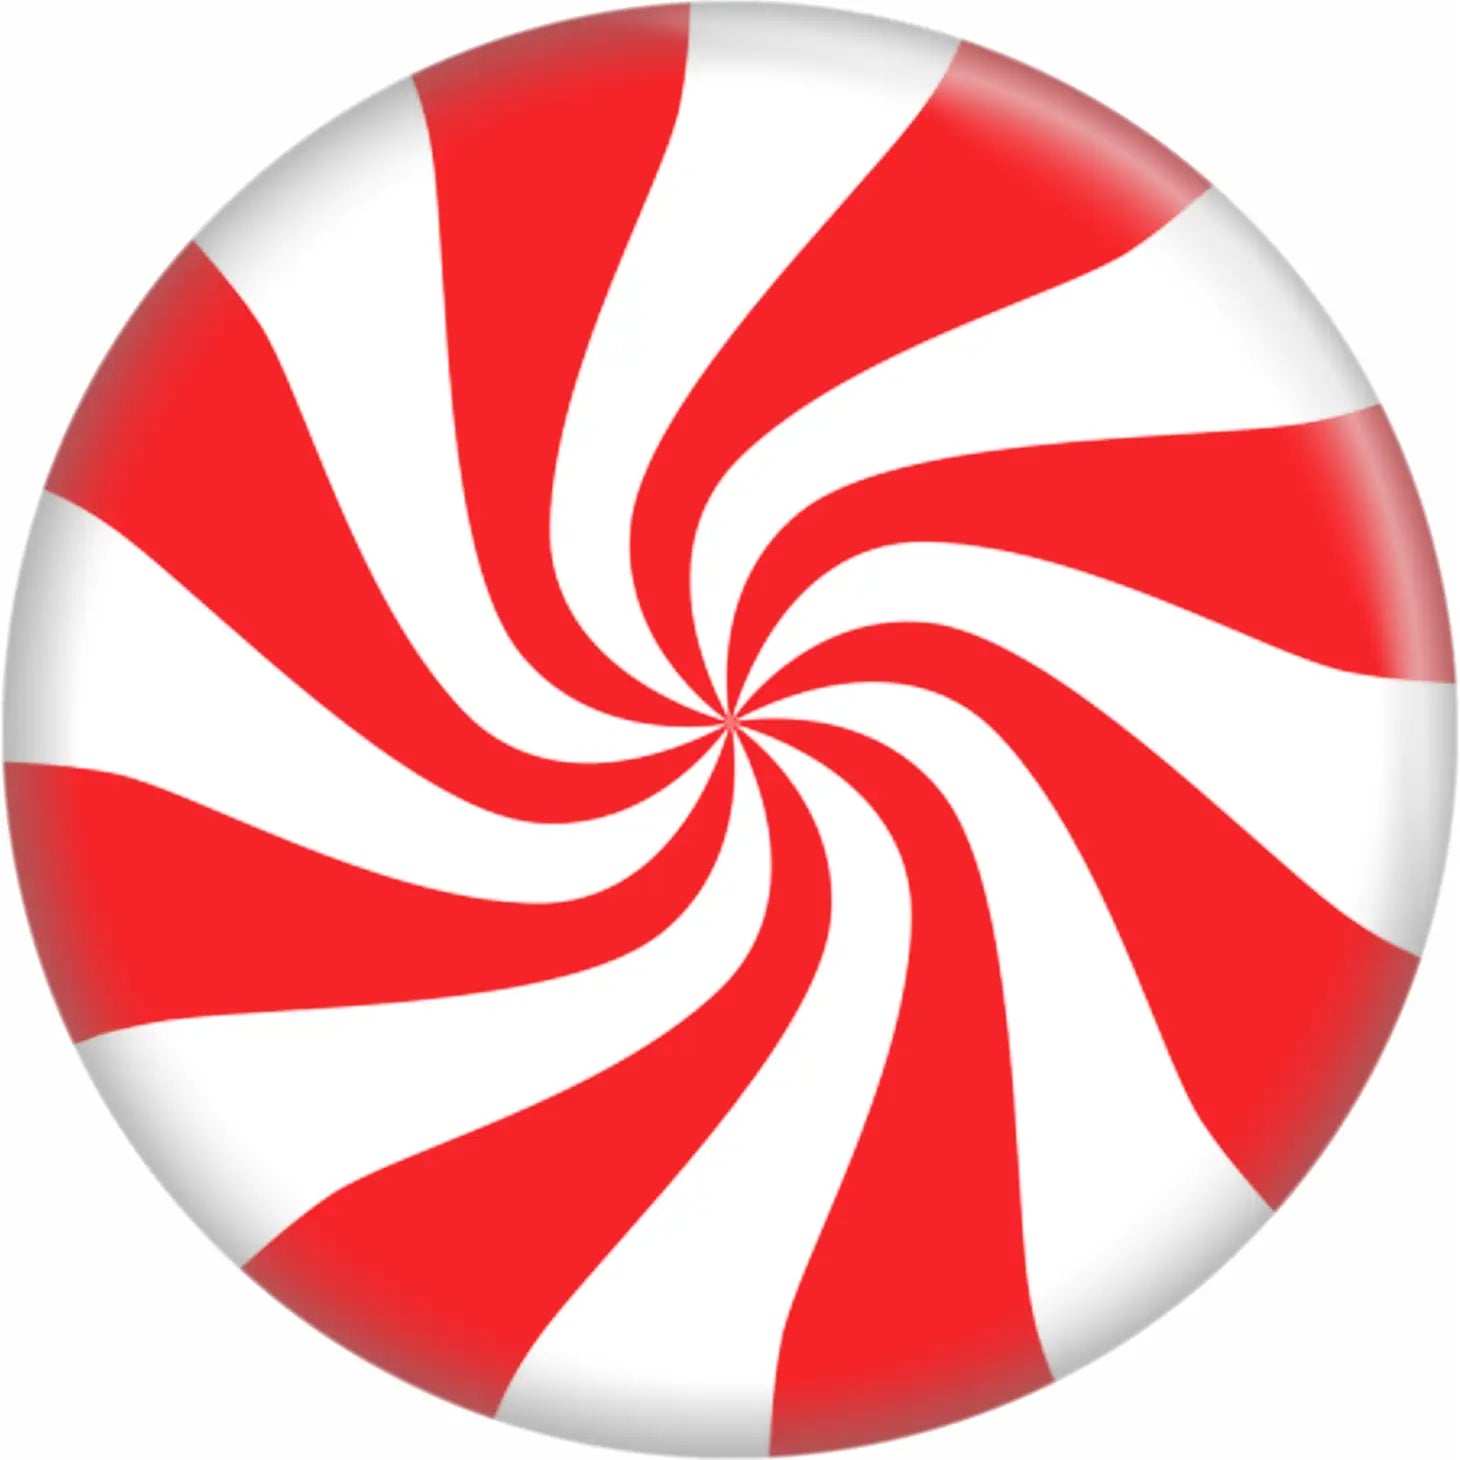 1.25” round pinback button with design of a red and white swirled peppermint